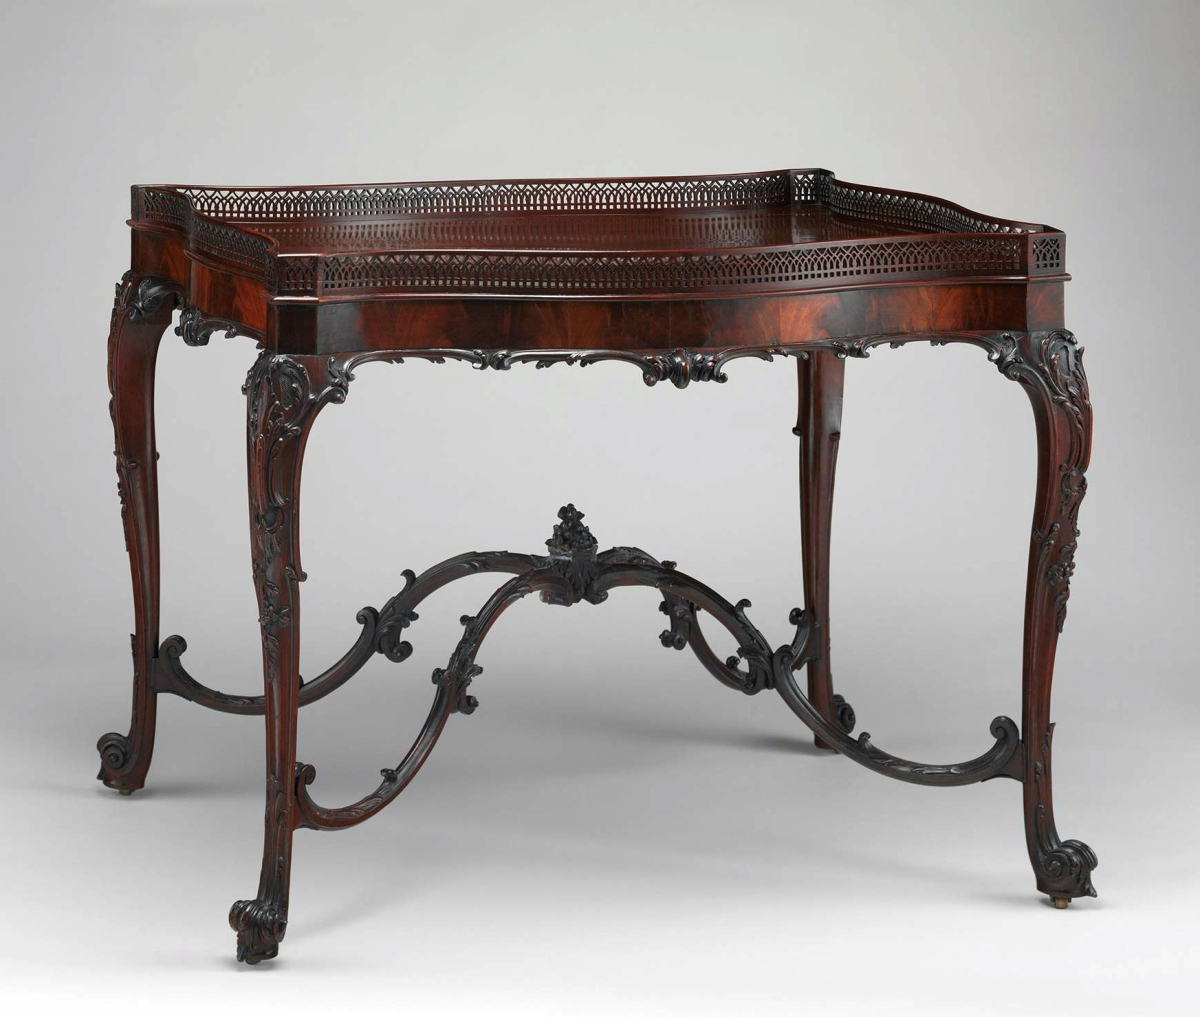 For this object, an unidentified furniture maker combined elements from two of Chippendale’s “China Table” designs. China table, England, circa 1755–60. Mahogany; 28¼ by 37¾ by 26½ inches. Metropolitan Museum of Art, gift of Irwin Untermyer, 1964. From “Chippendale’s Director: The Designs and Legacy of a Furniture Maker,” Metropolitan Museum of Art.